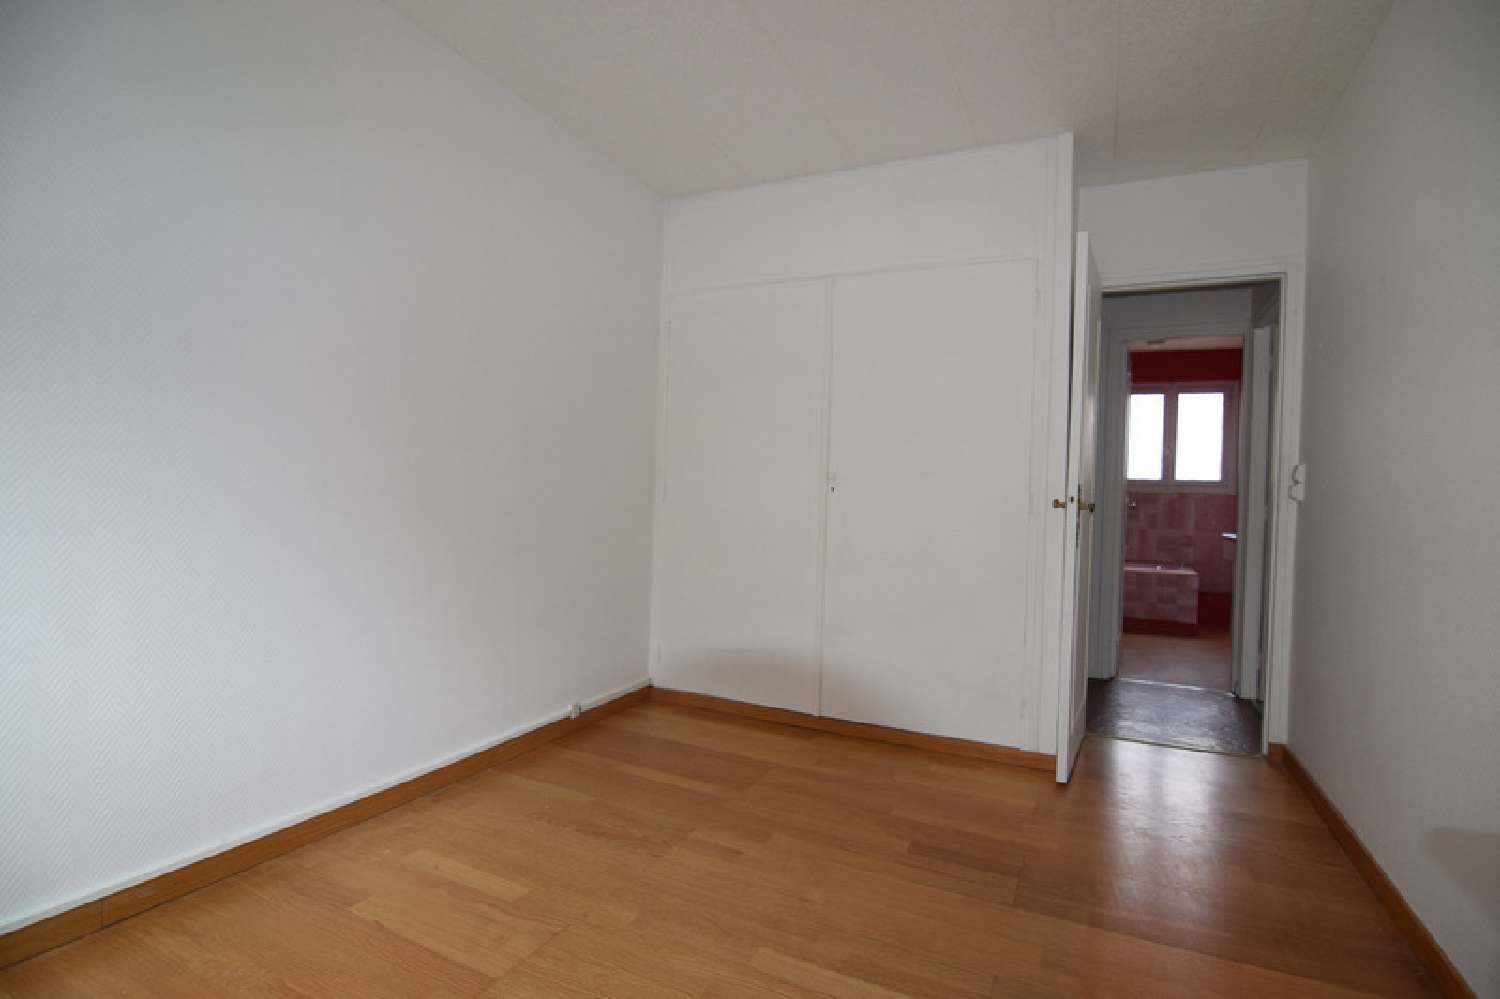  kaufen Wohnung/ Apartment Fâches-Thumesnil Nord 4